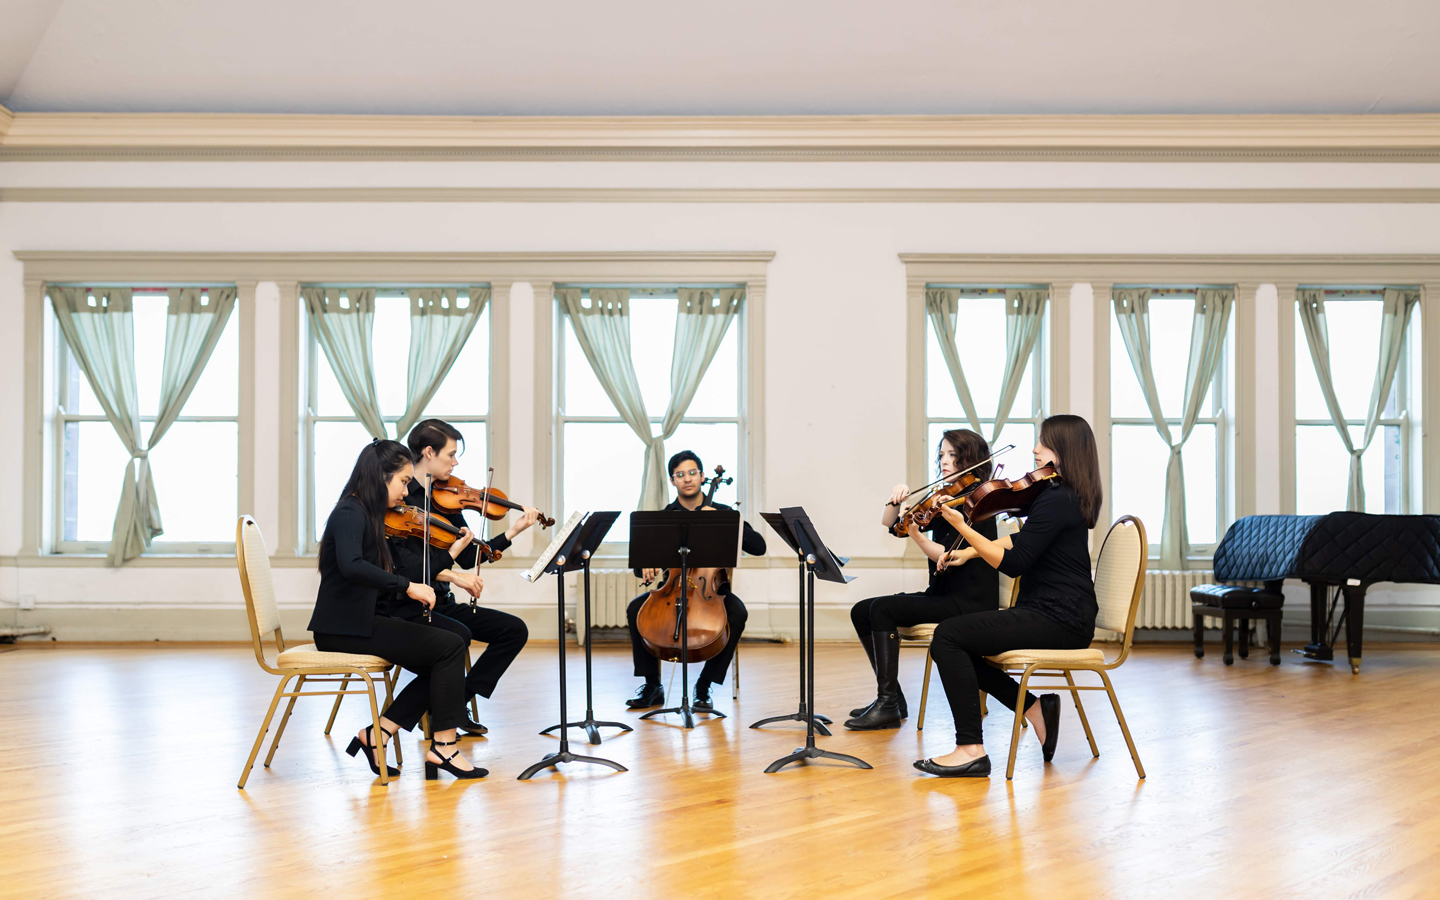 Four studentd playing violin and one student playing the cello sitting in a bright room with large windows.